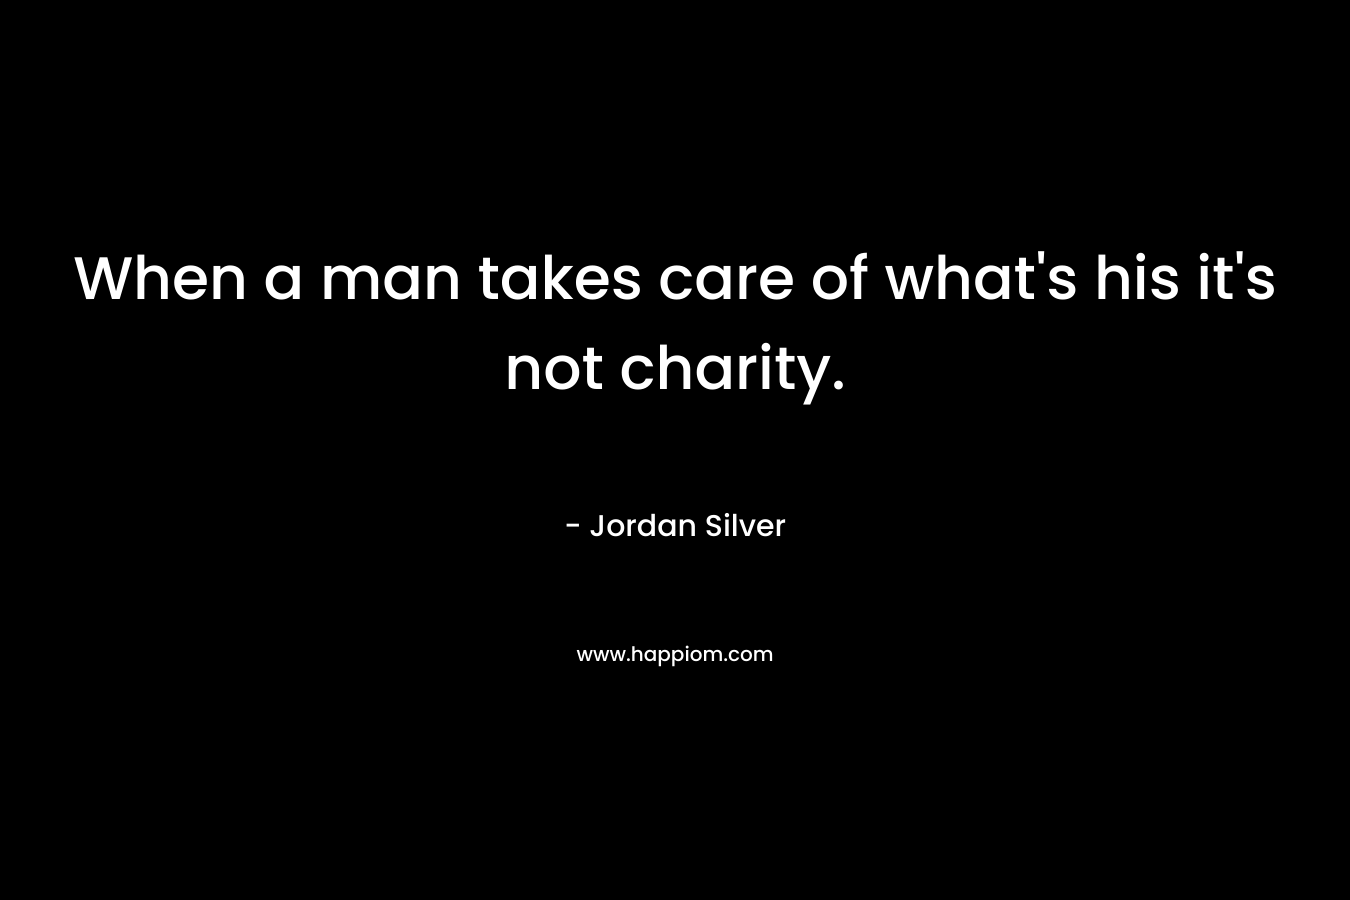 When a man takes care of what's his it's not charity.